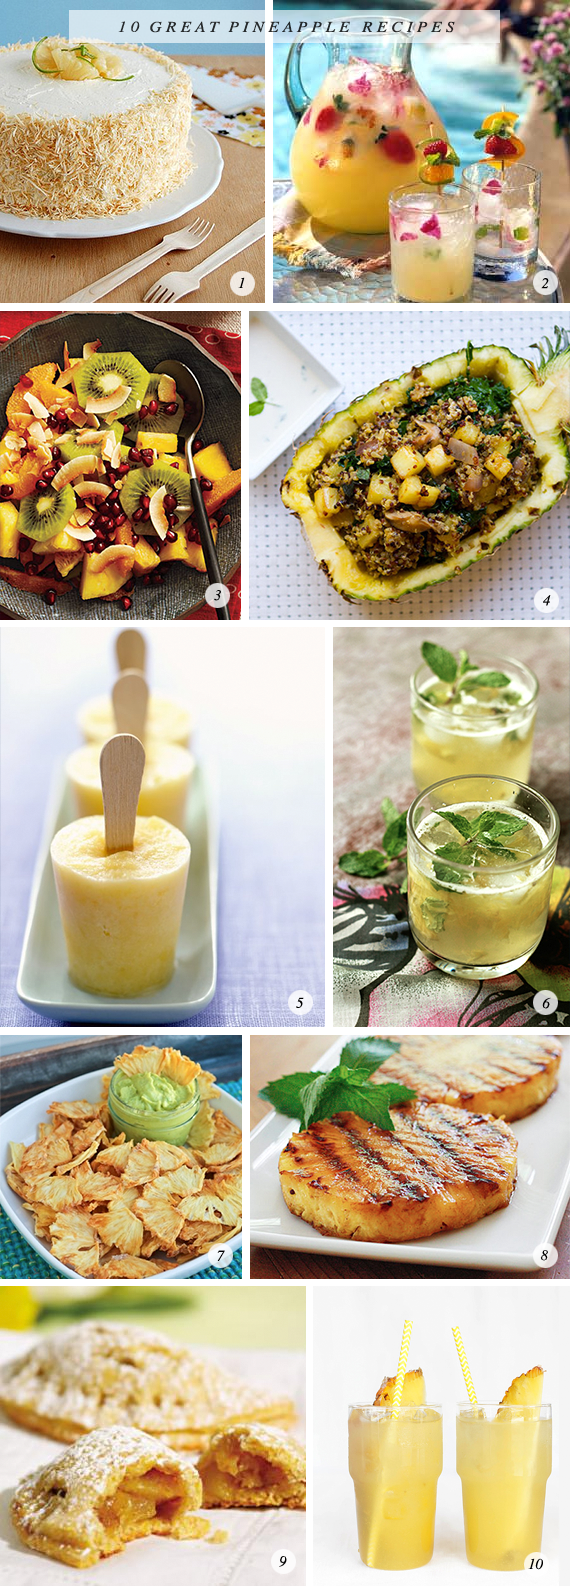 10 Great Pineapple Recipes // Bubby and Bean